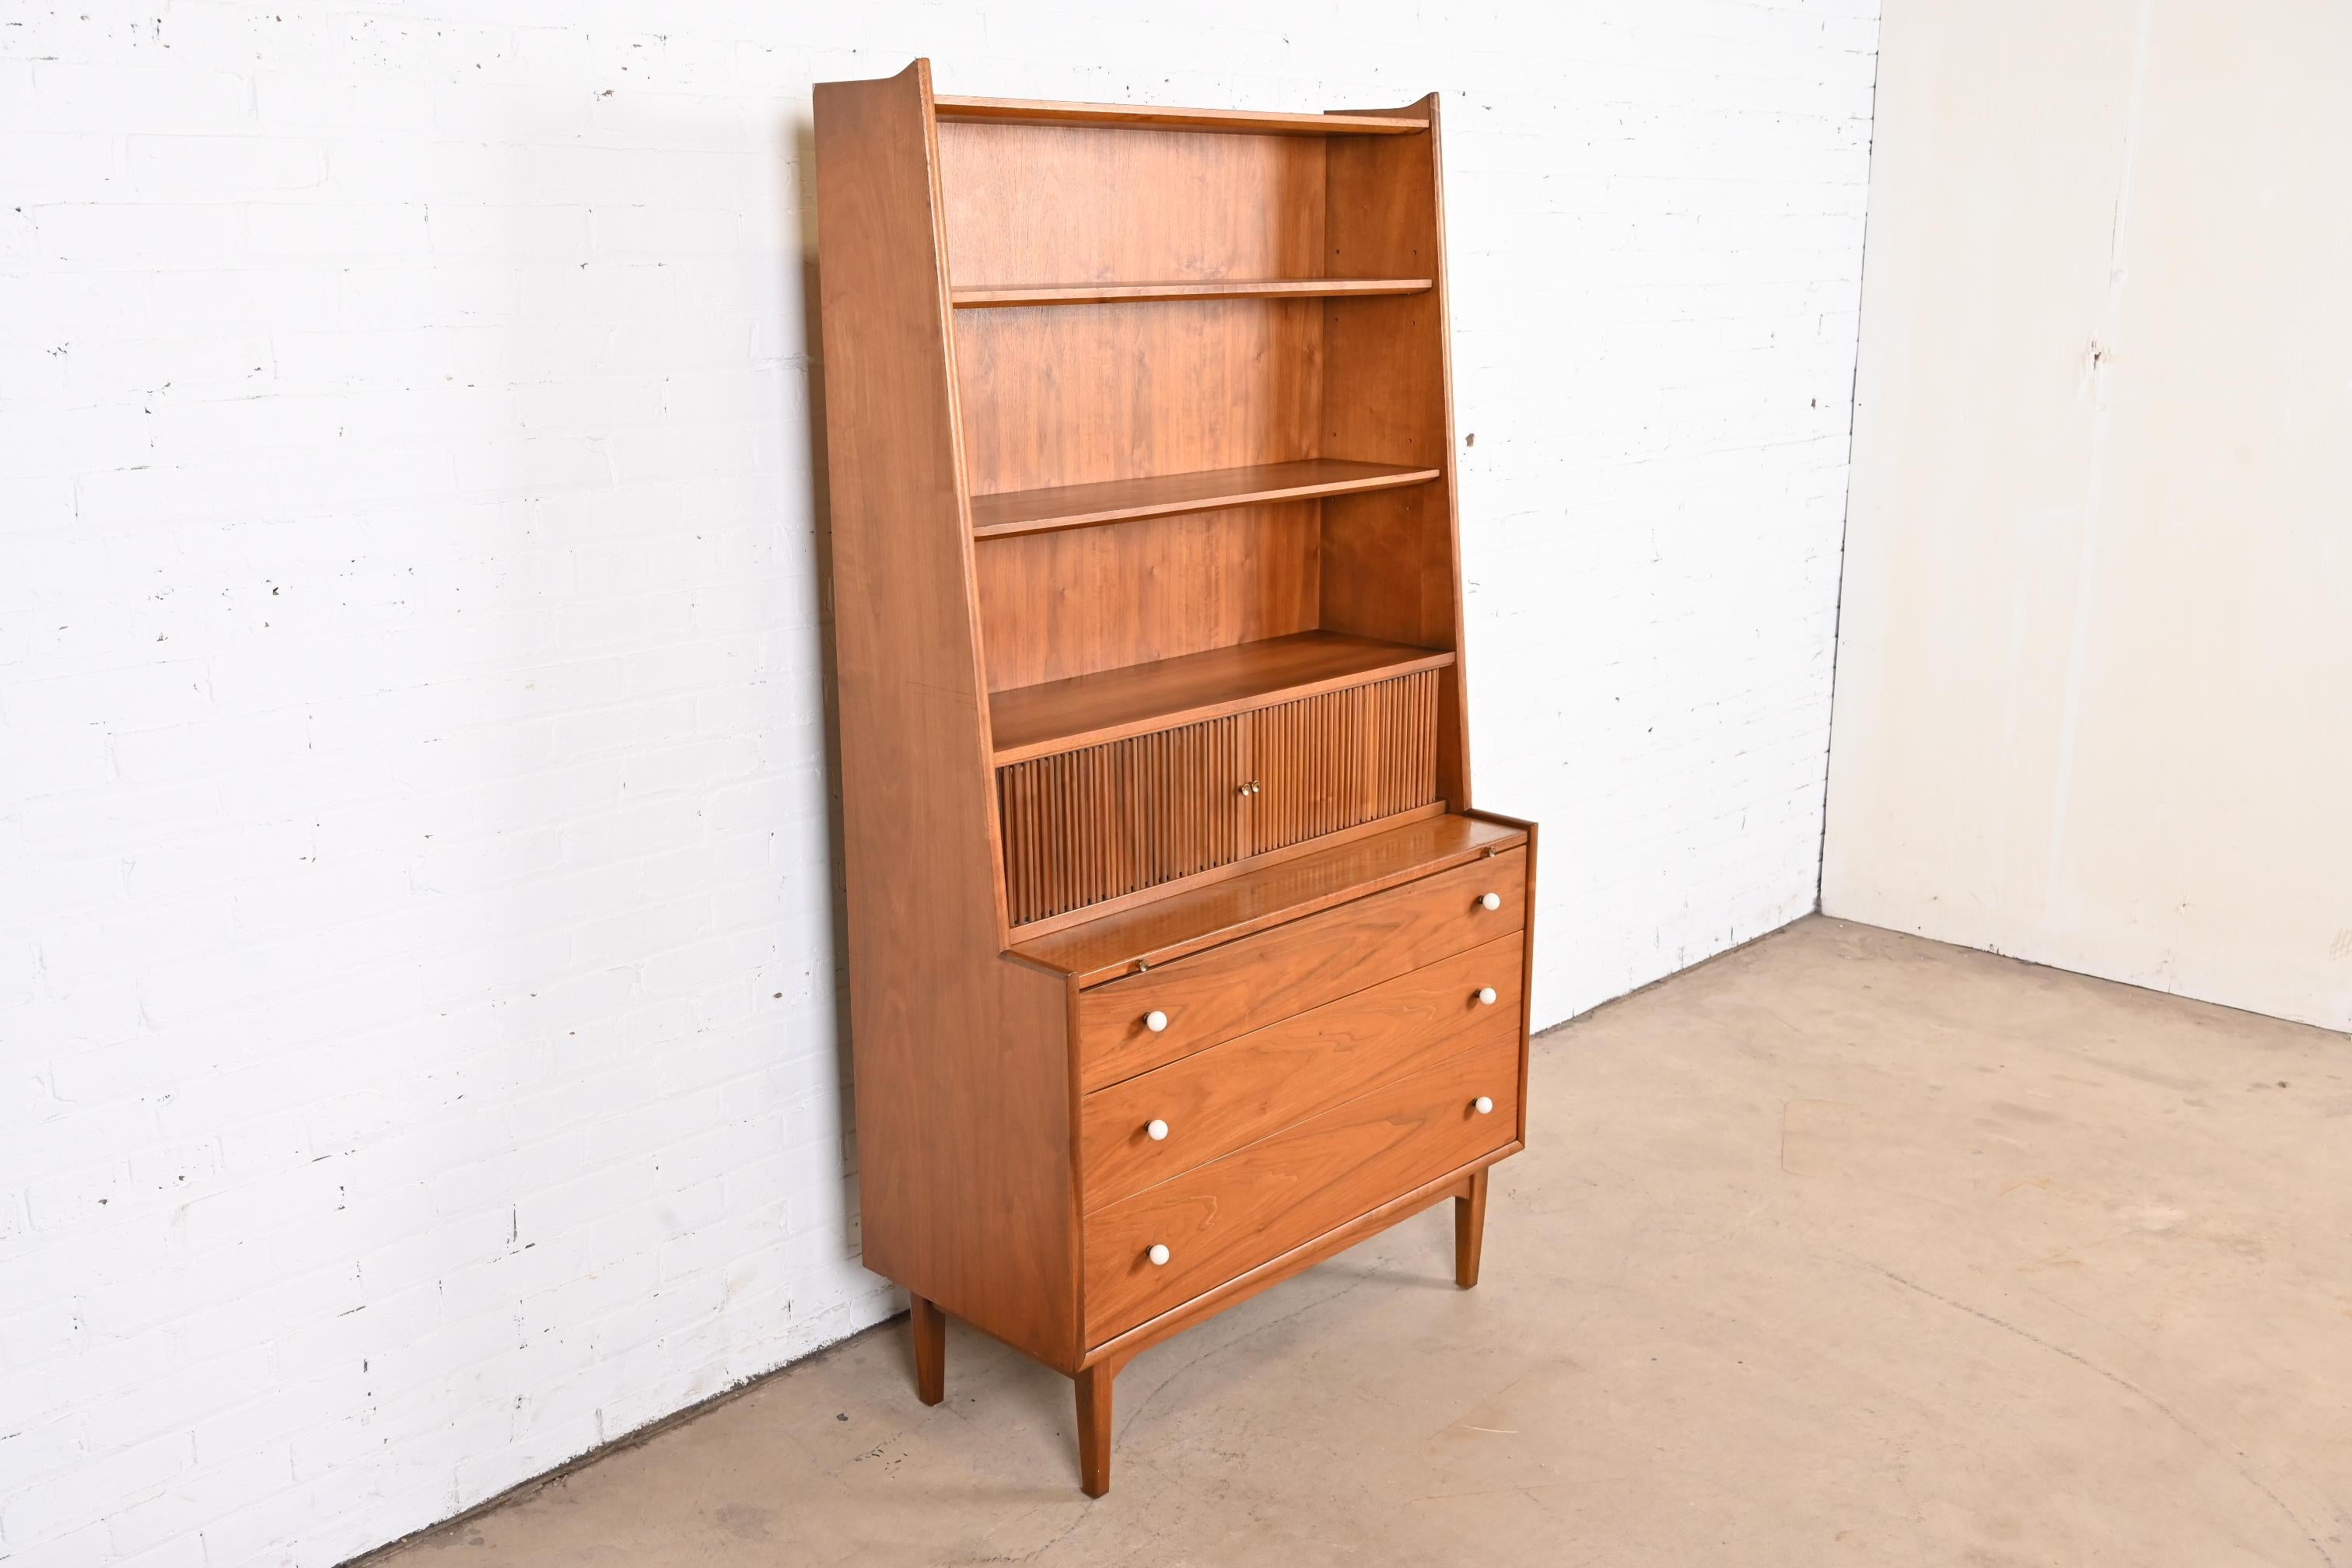 Kipp Stewart for Drexel Walnut Tambour Door Secretary Desk with Bookcase, 1966 In Good Condition For Sale In South Bend, IN